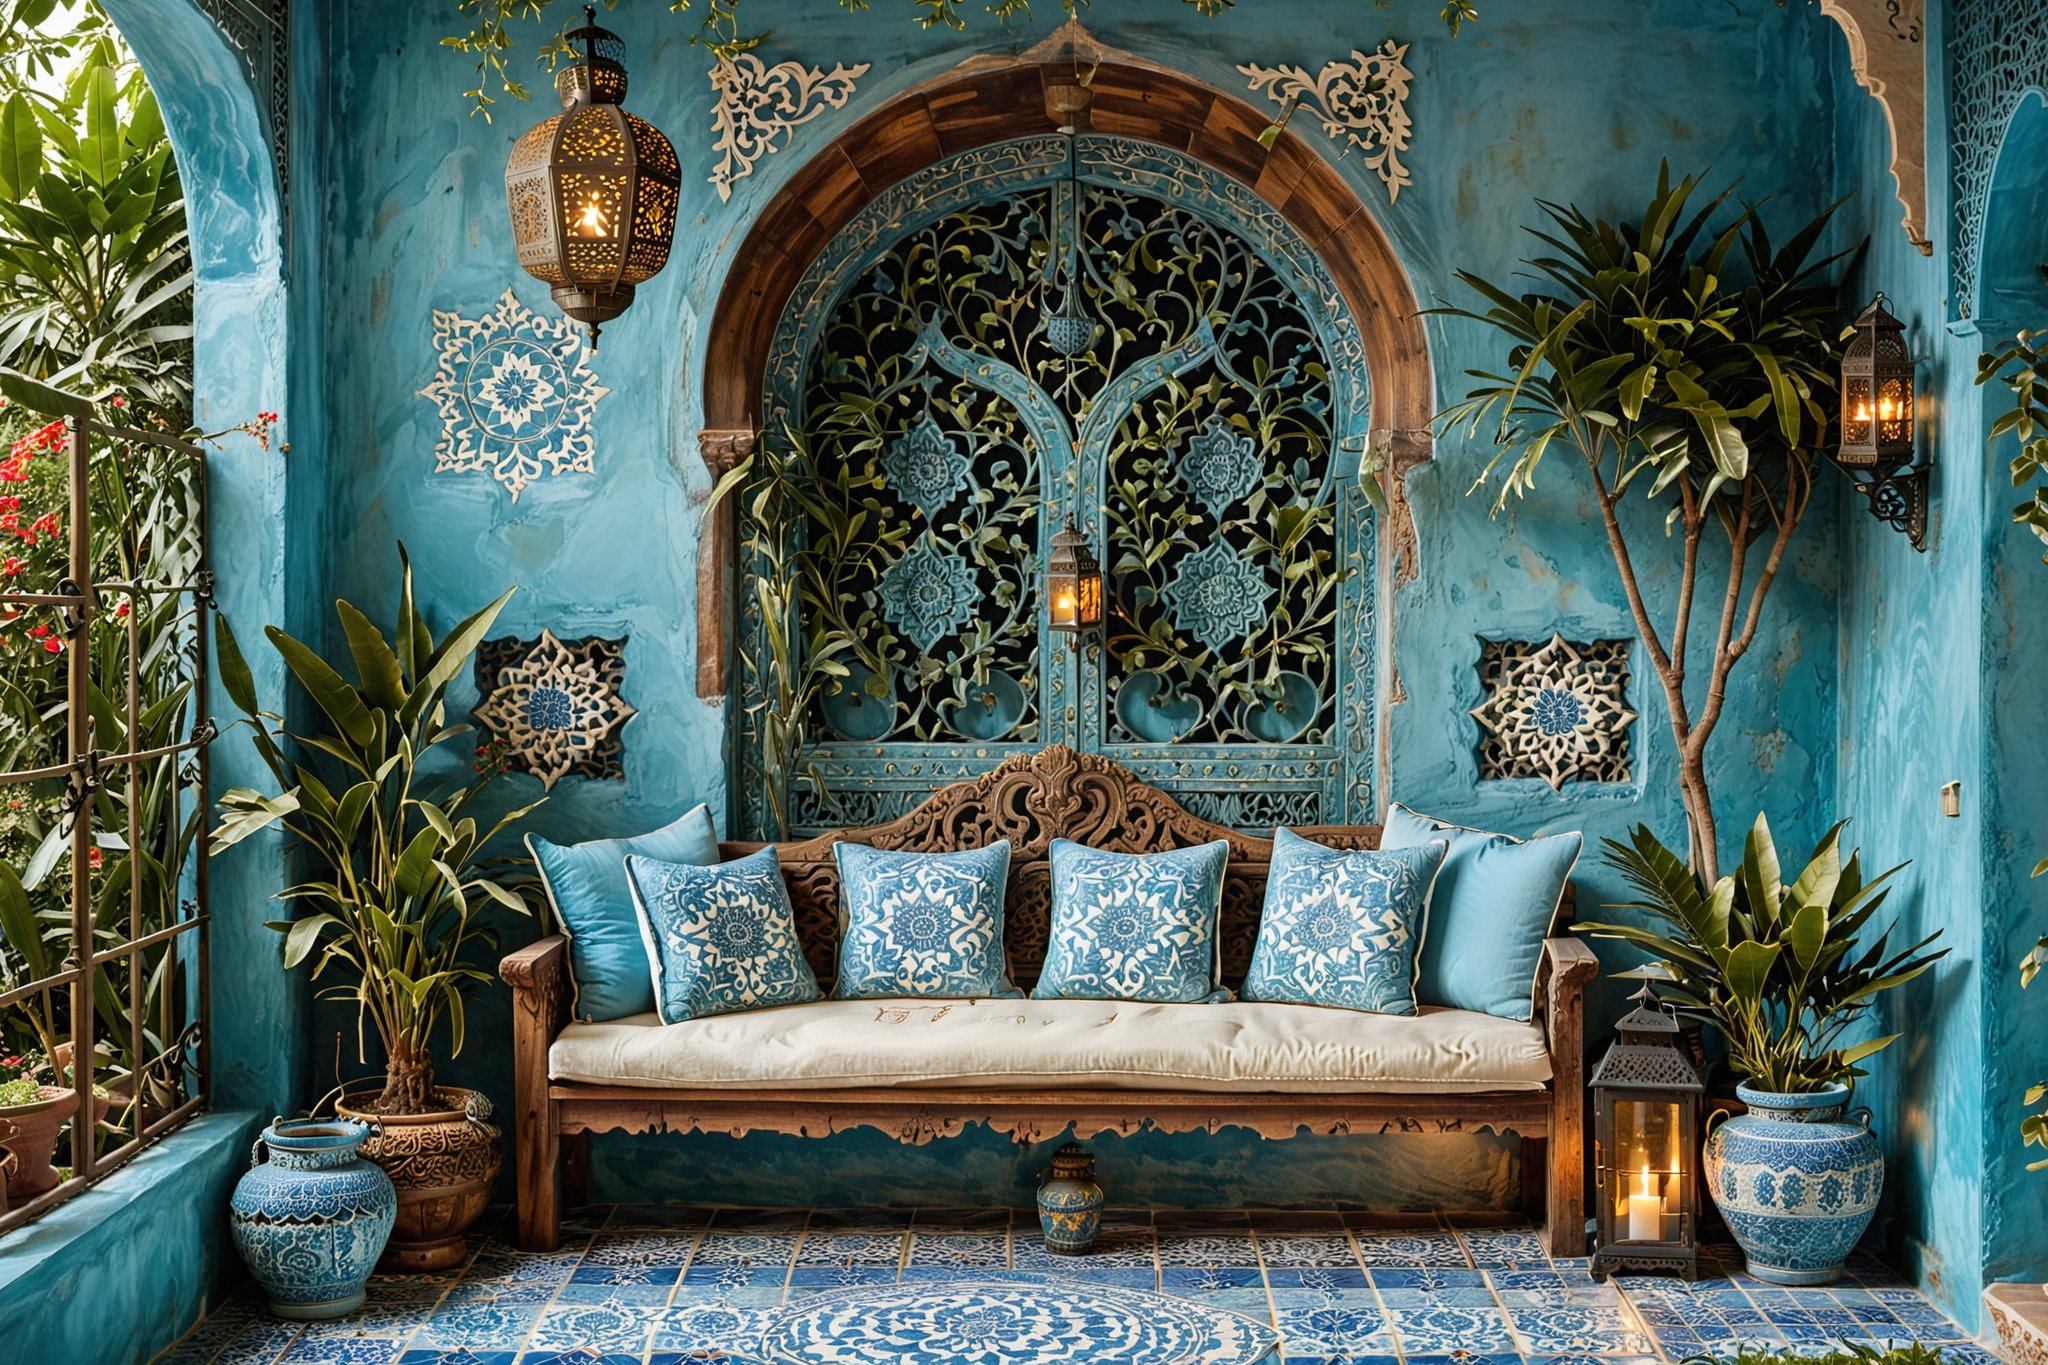 A serene outdoor space, characterized by a soft blue wall. A beautifully carved wooden arched door stands to the right, adorned with intricate designs. Above the door, a lantern hangs, casting a gentle glow. To the left, a window allows sunlight to seep in, illuminating a seating area. This area features a wooden bench with blue and white patterned cushions, surrounded by potted plants. The floor is made of light-colored tiles, and the overall ambiance exudes tranquility and warmth.